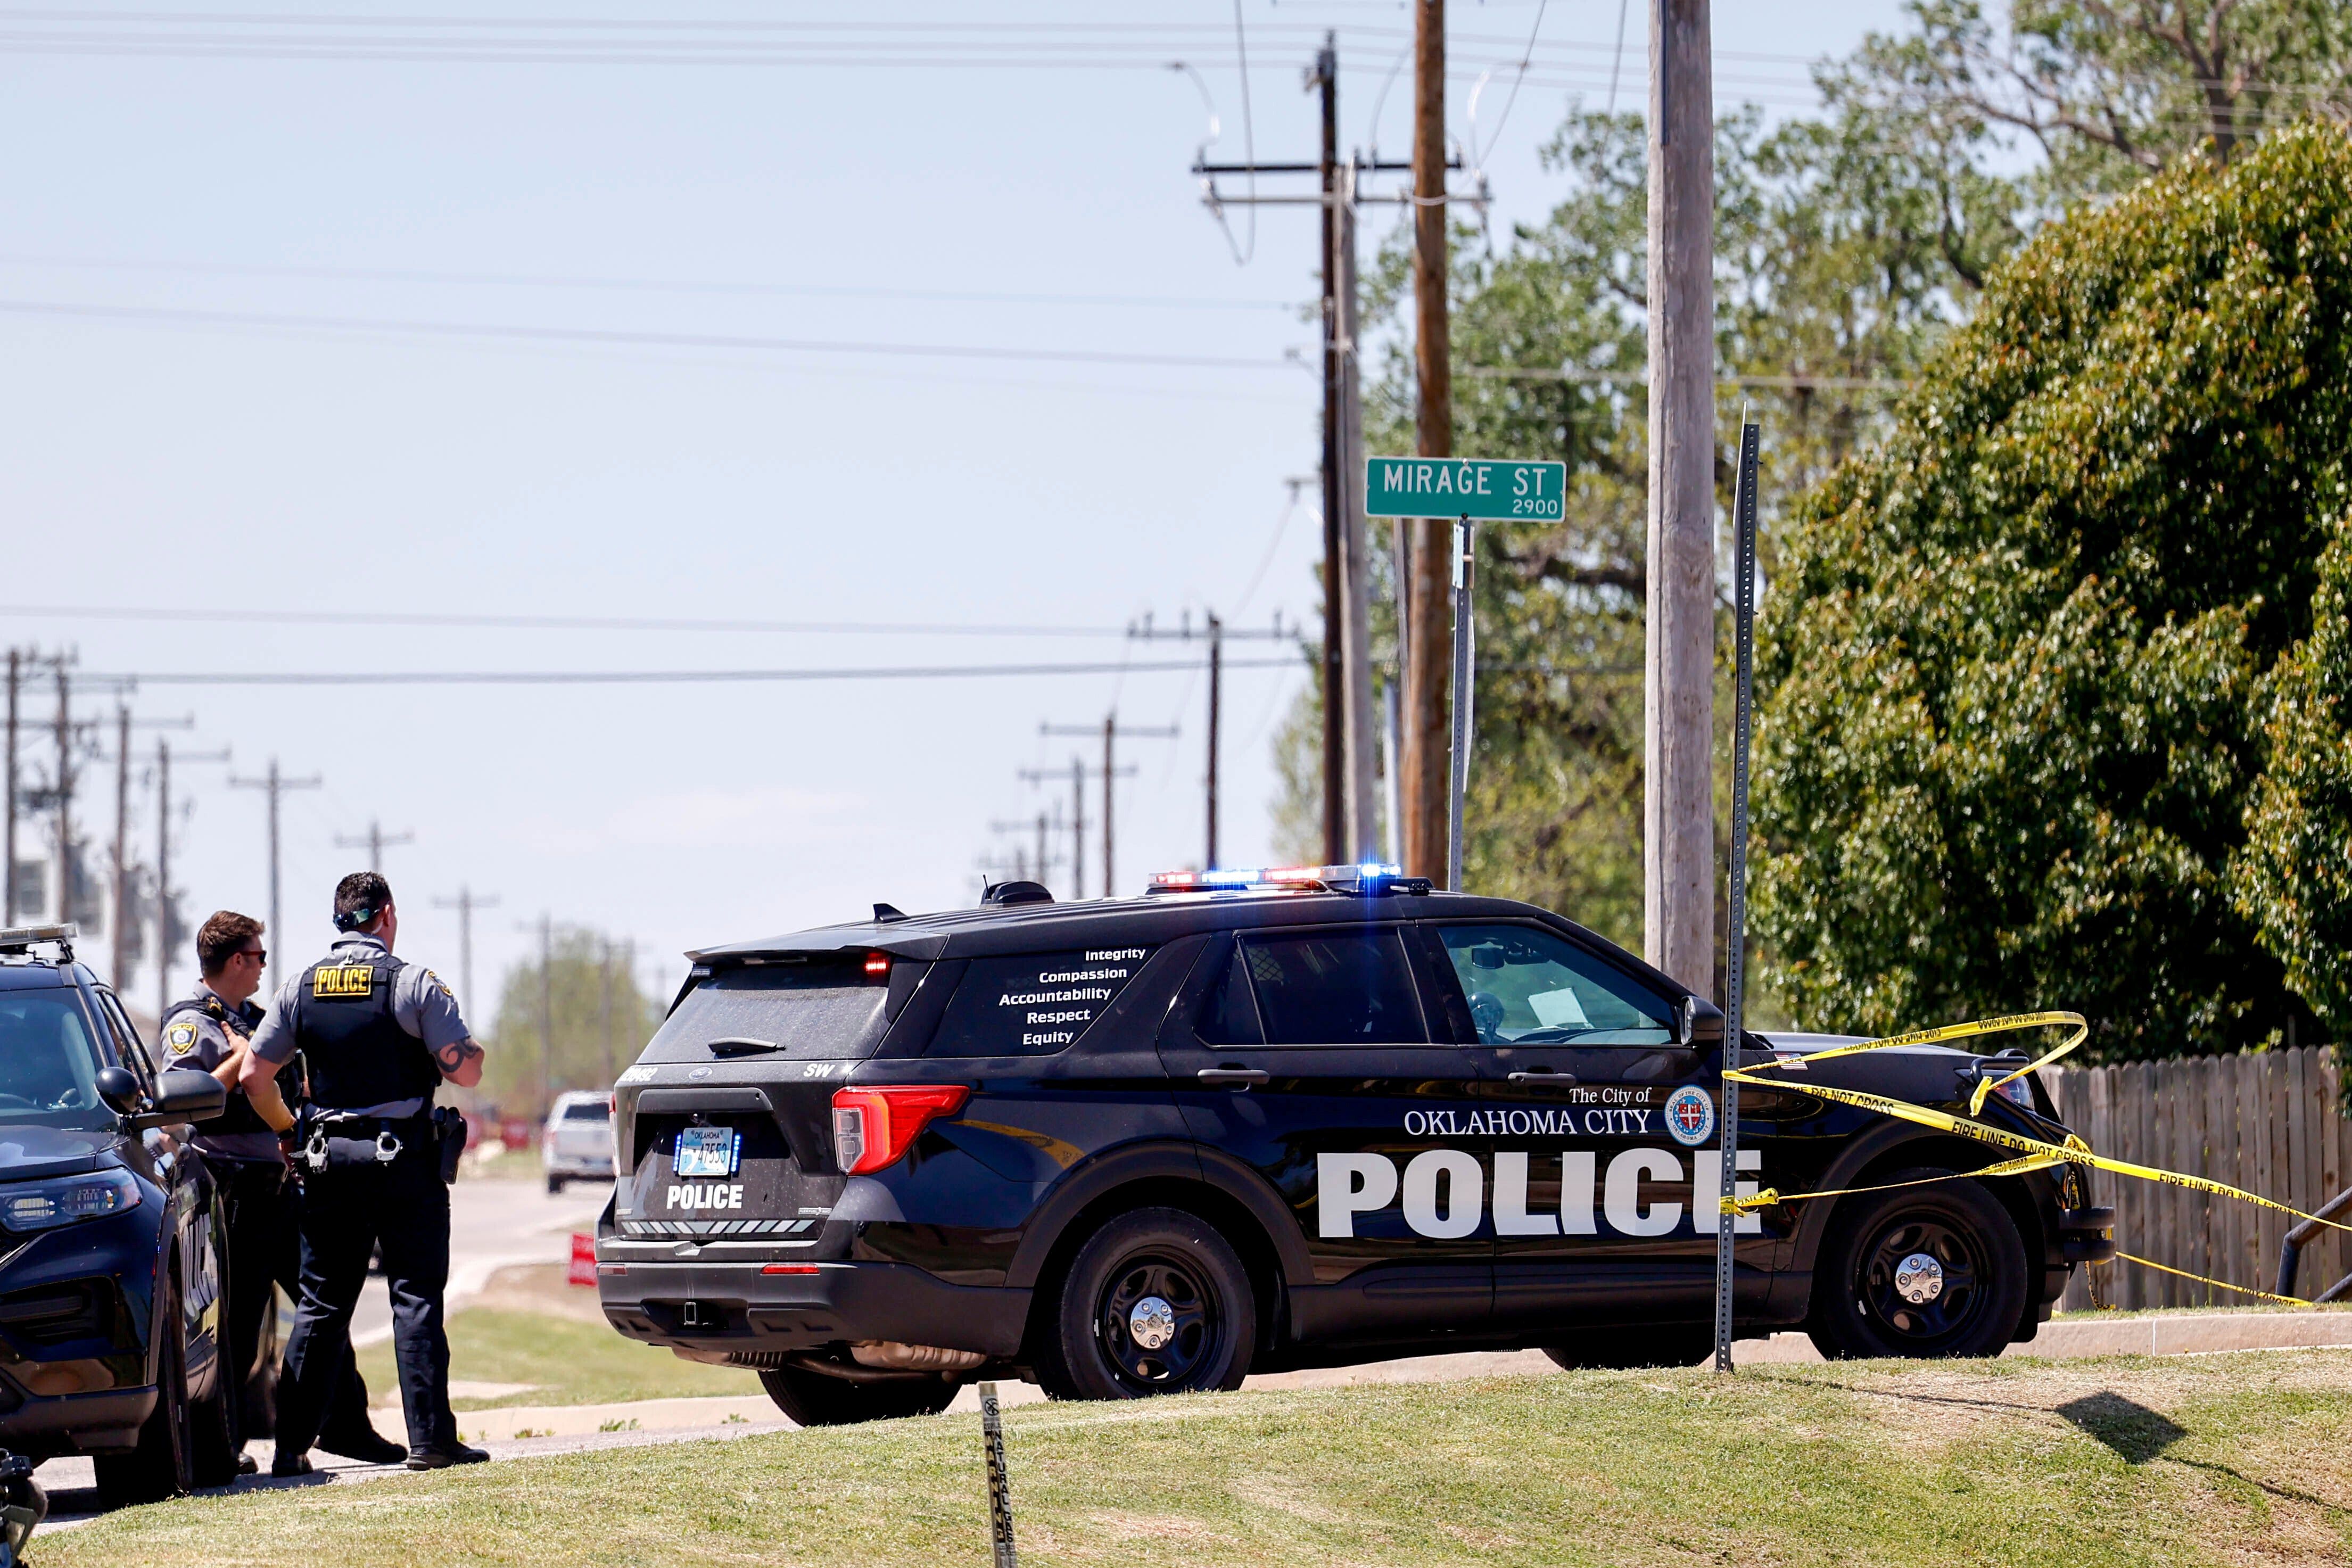 Polcie on the scene of the shootings in Oklahoma City